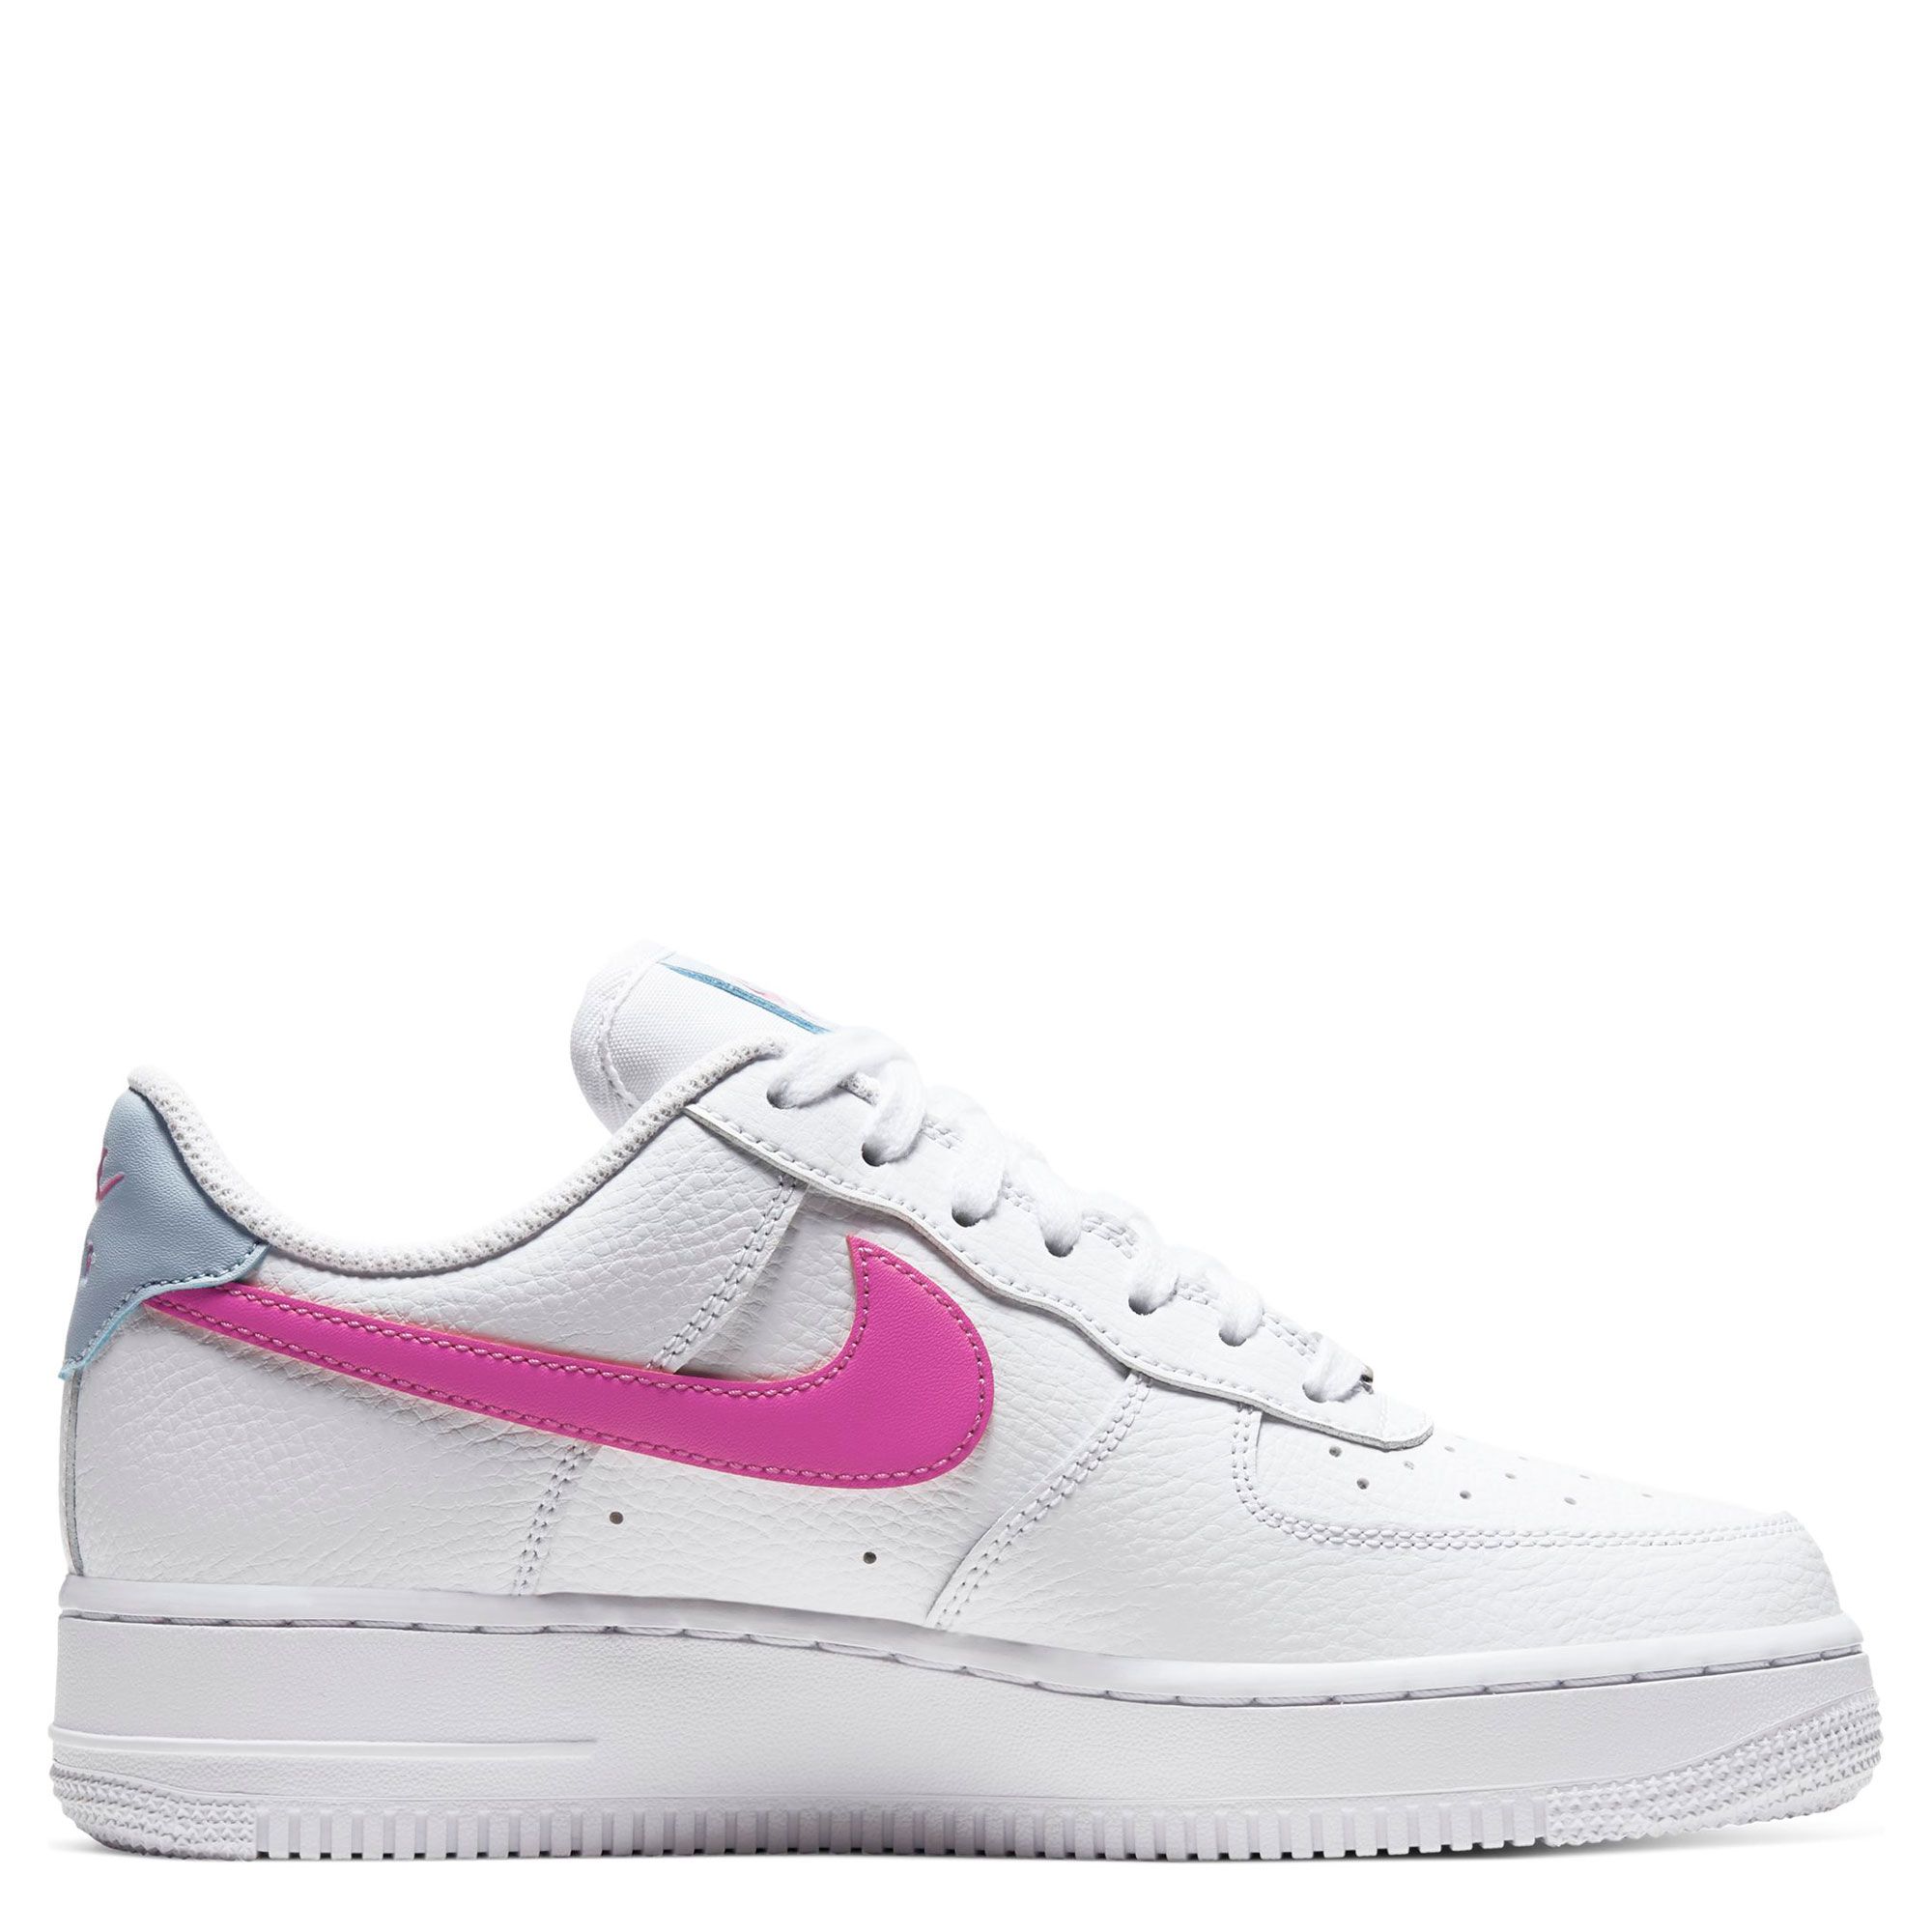 pink air force ones womens